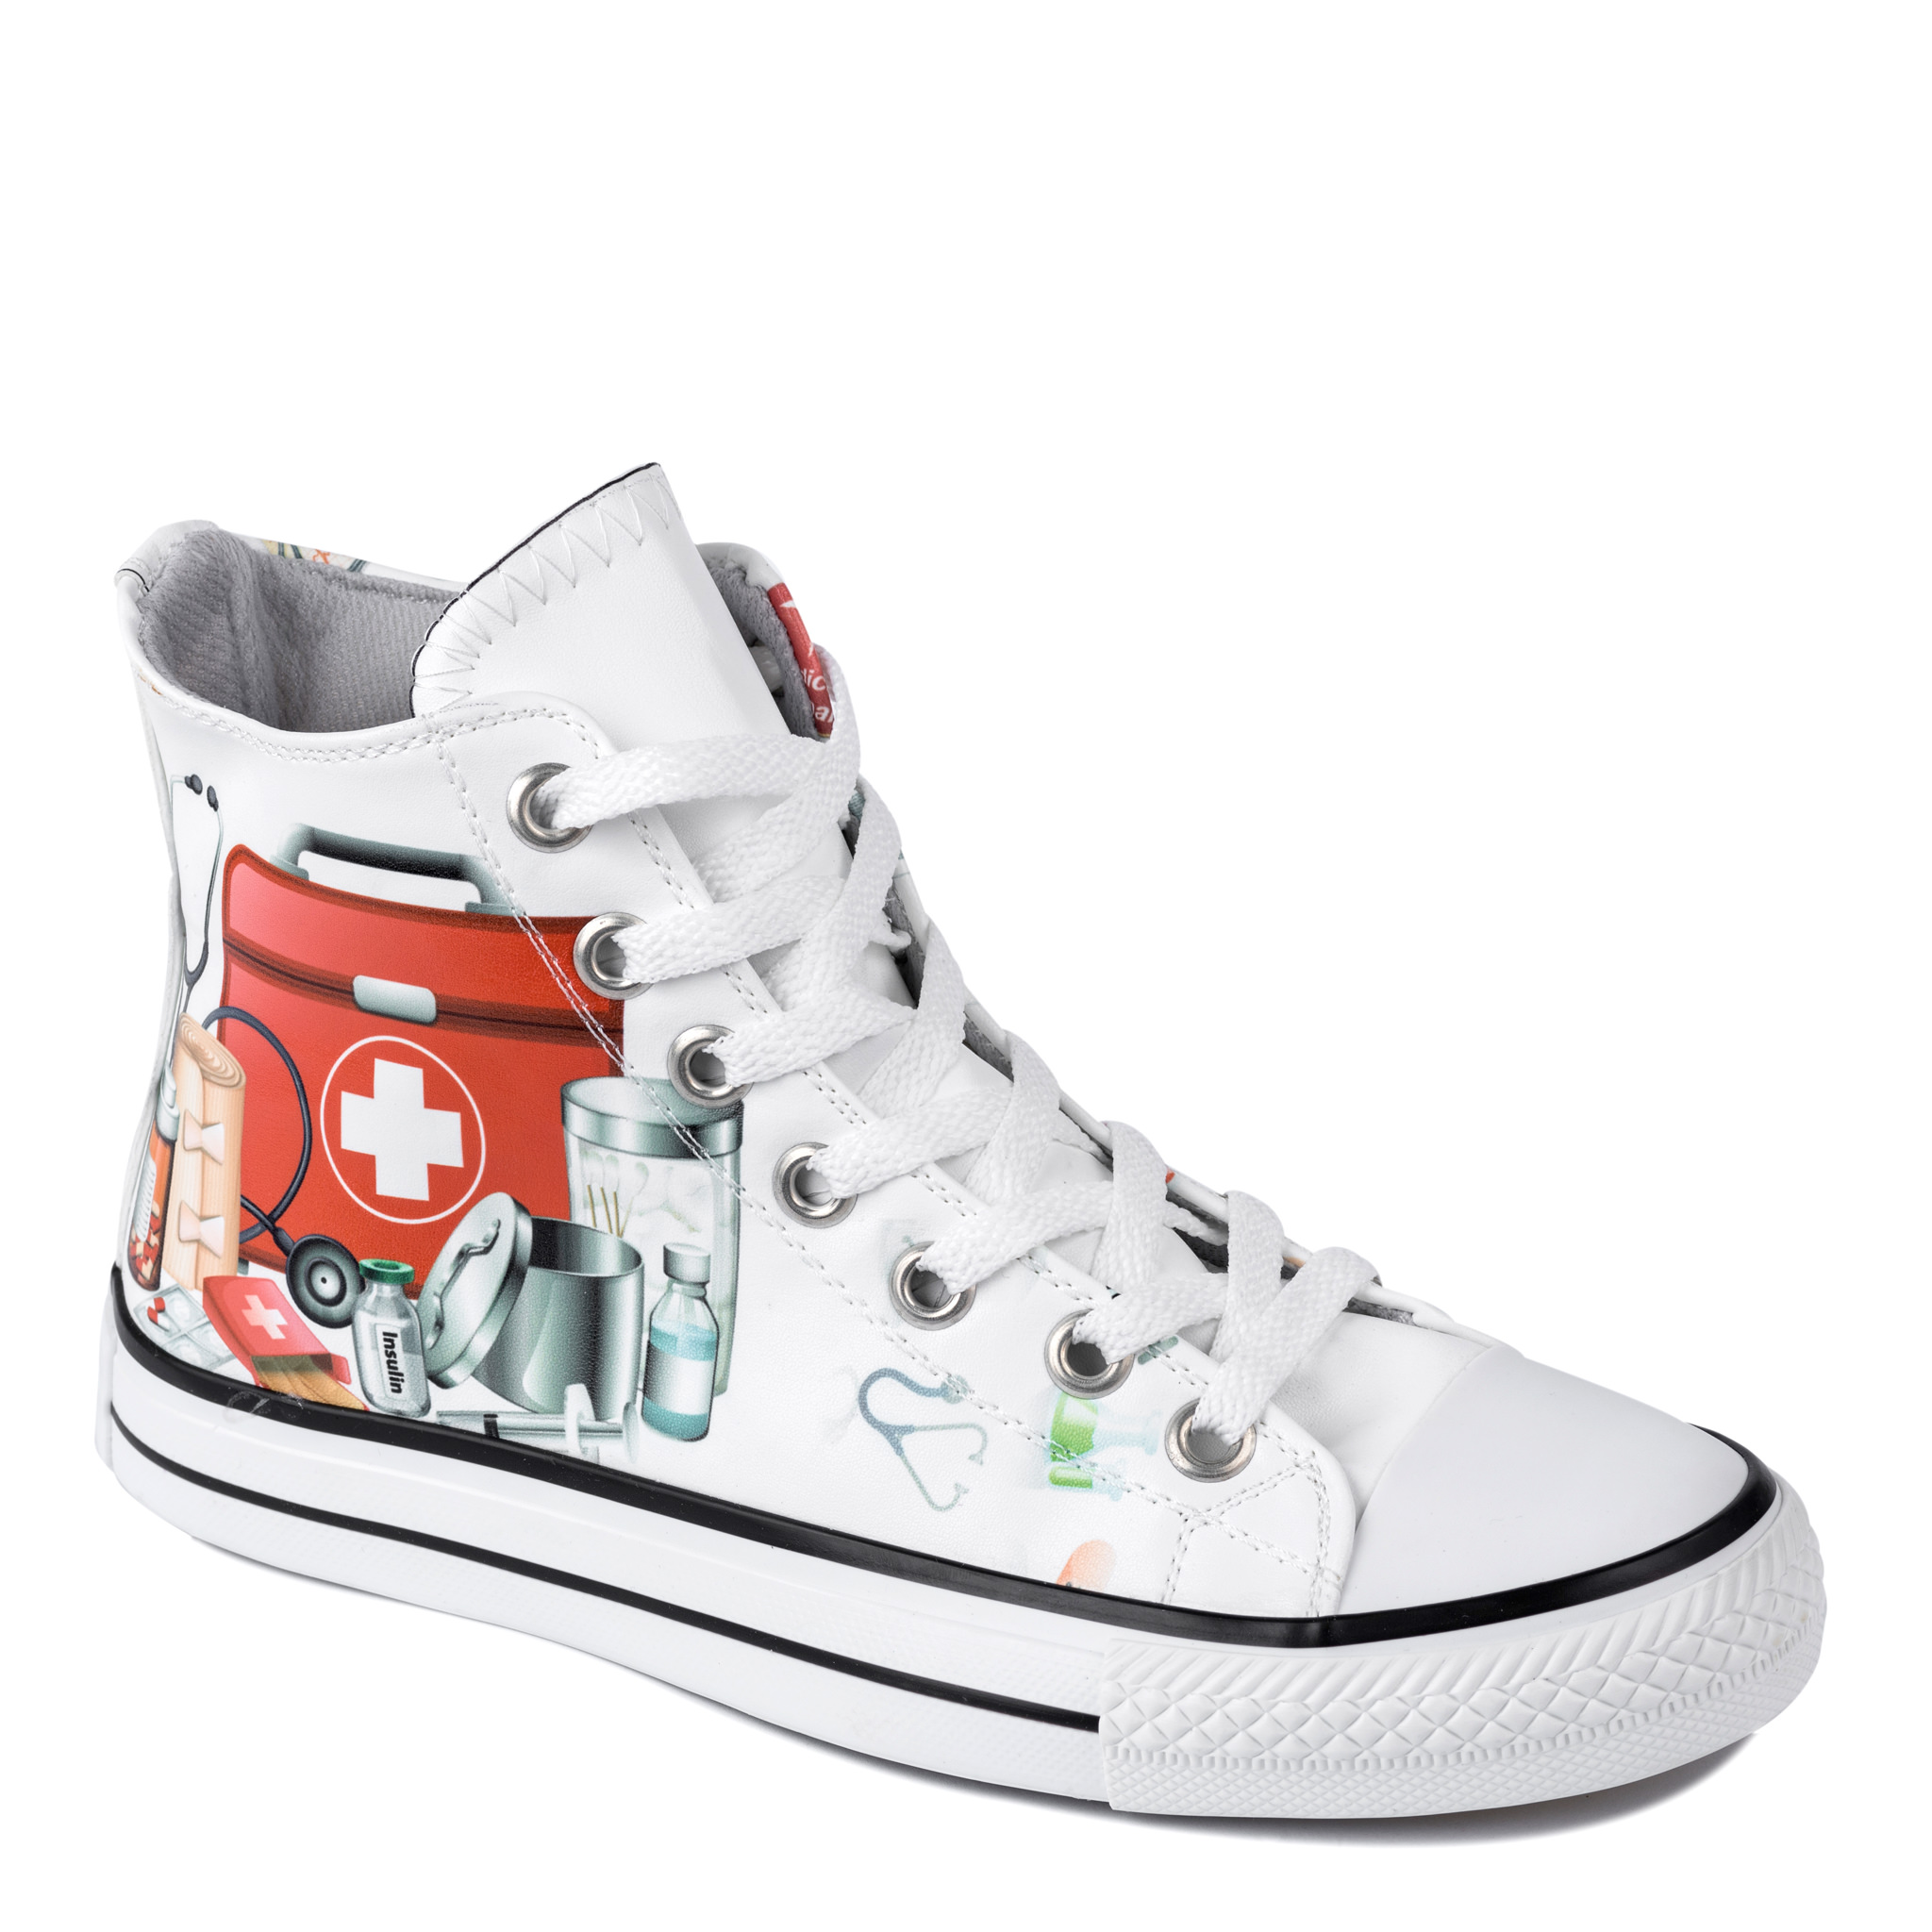 MEDICAL PRINT ANKLE SNEAKERS - WHITE